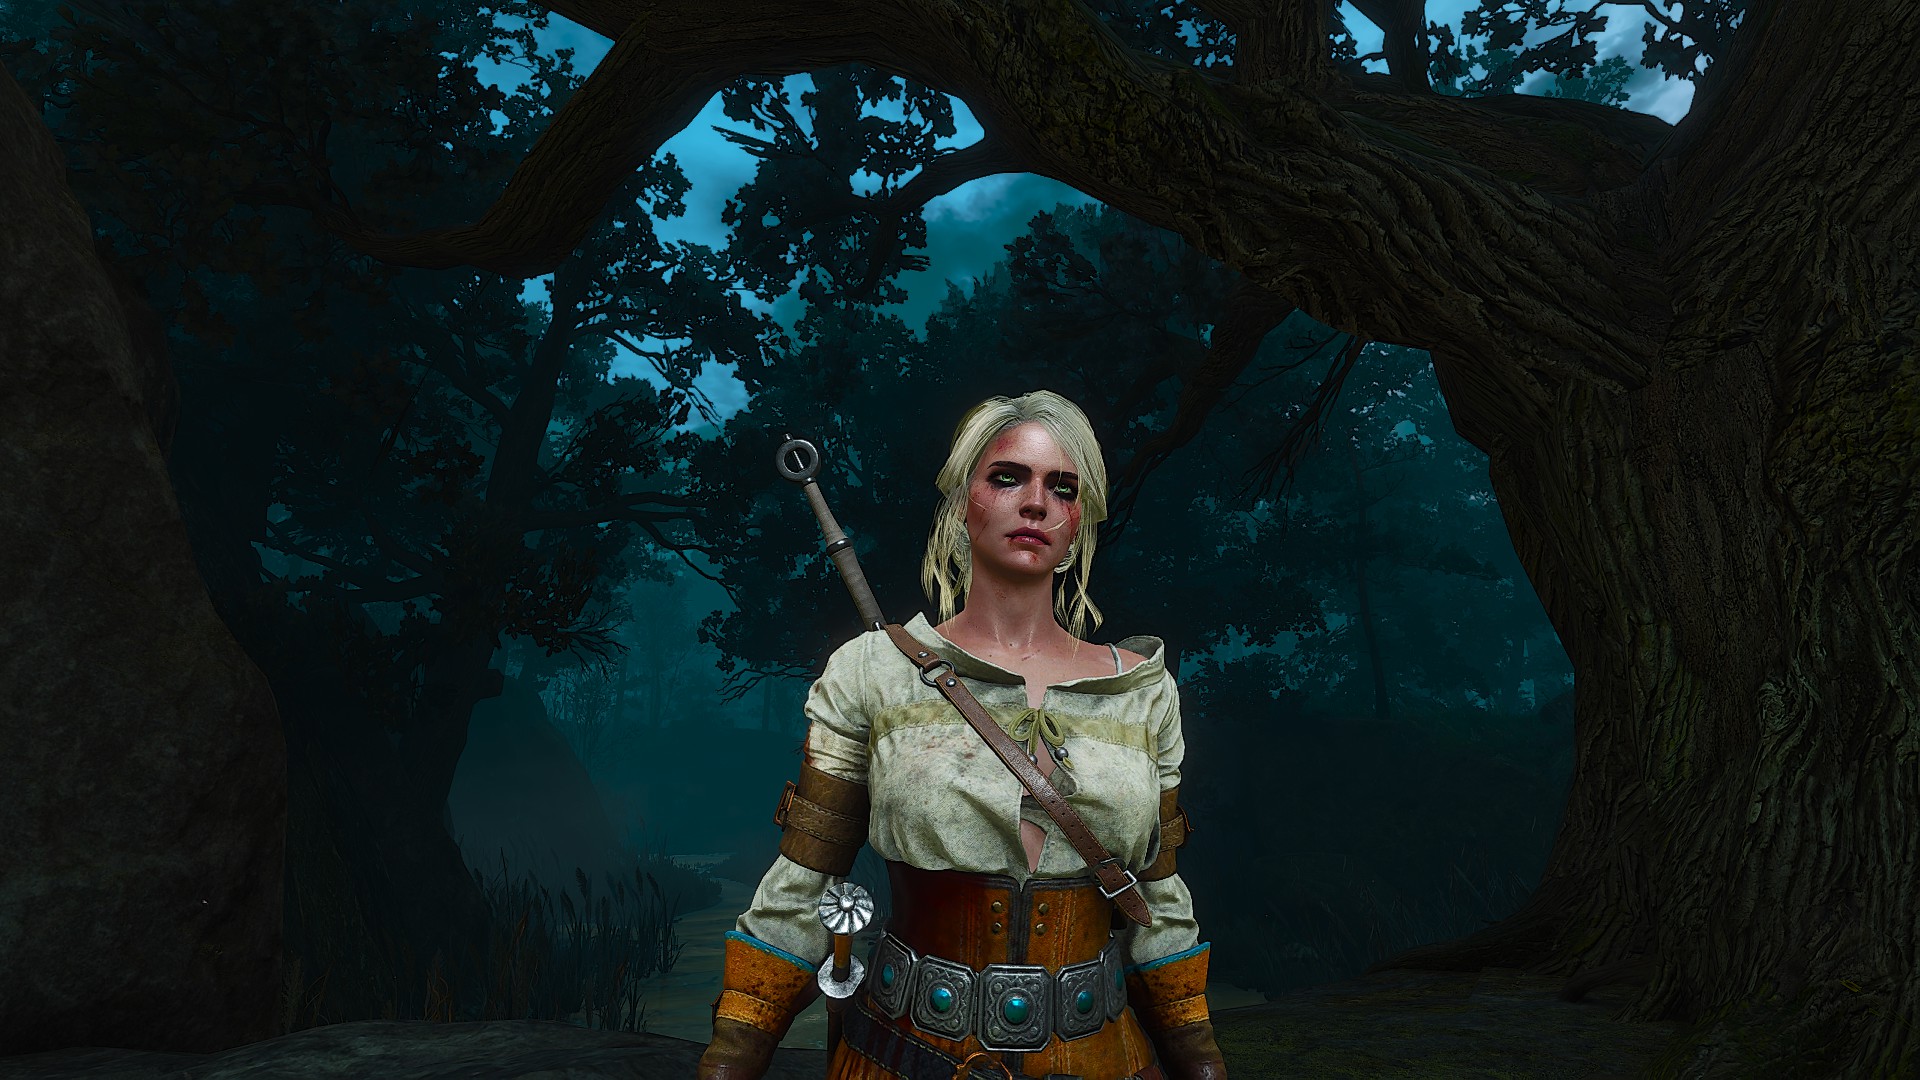 General 1920x1080 The Witcher 3: Wild Hunt - Blood and Wine Cirilla Fiona Elen Riannon screen shot video games video game characters video game girls Book characters CD Projekt RED